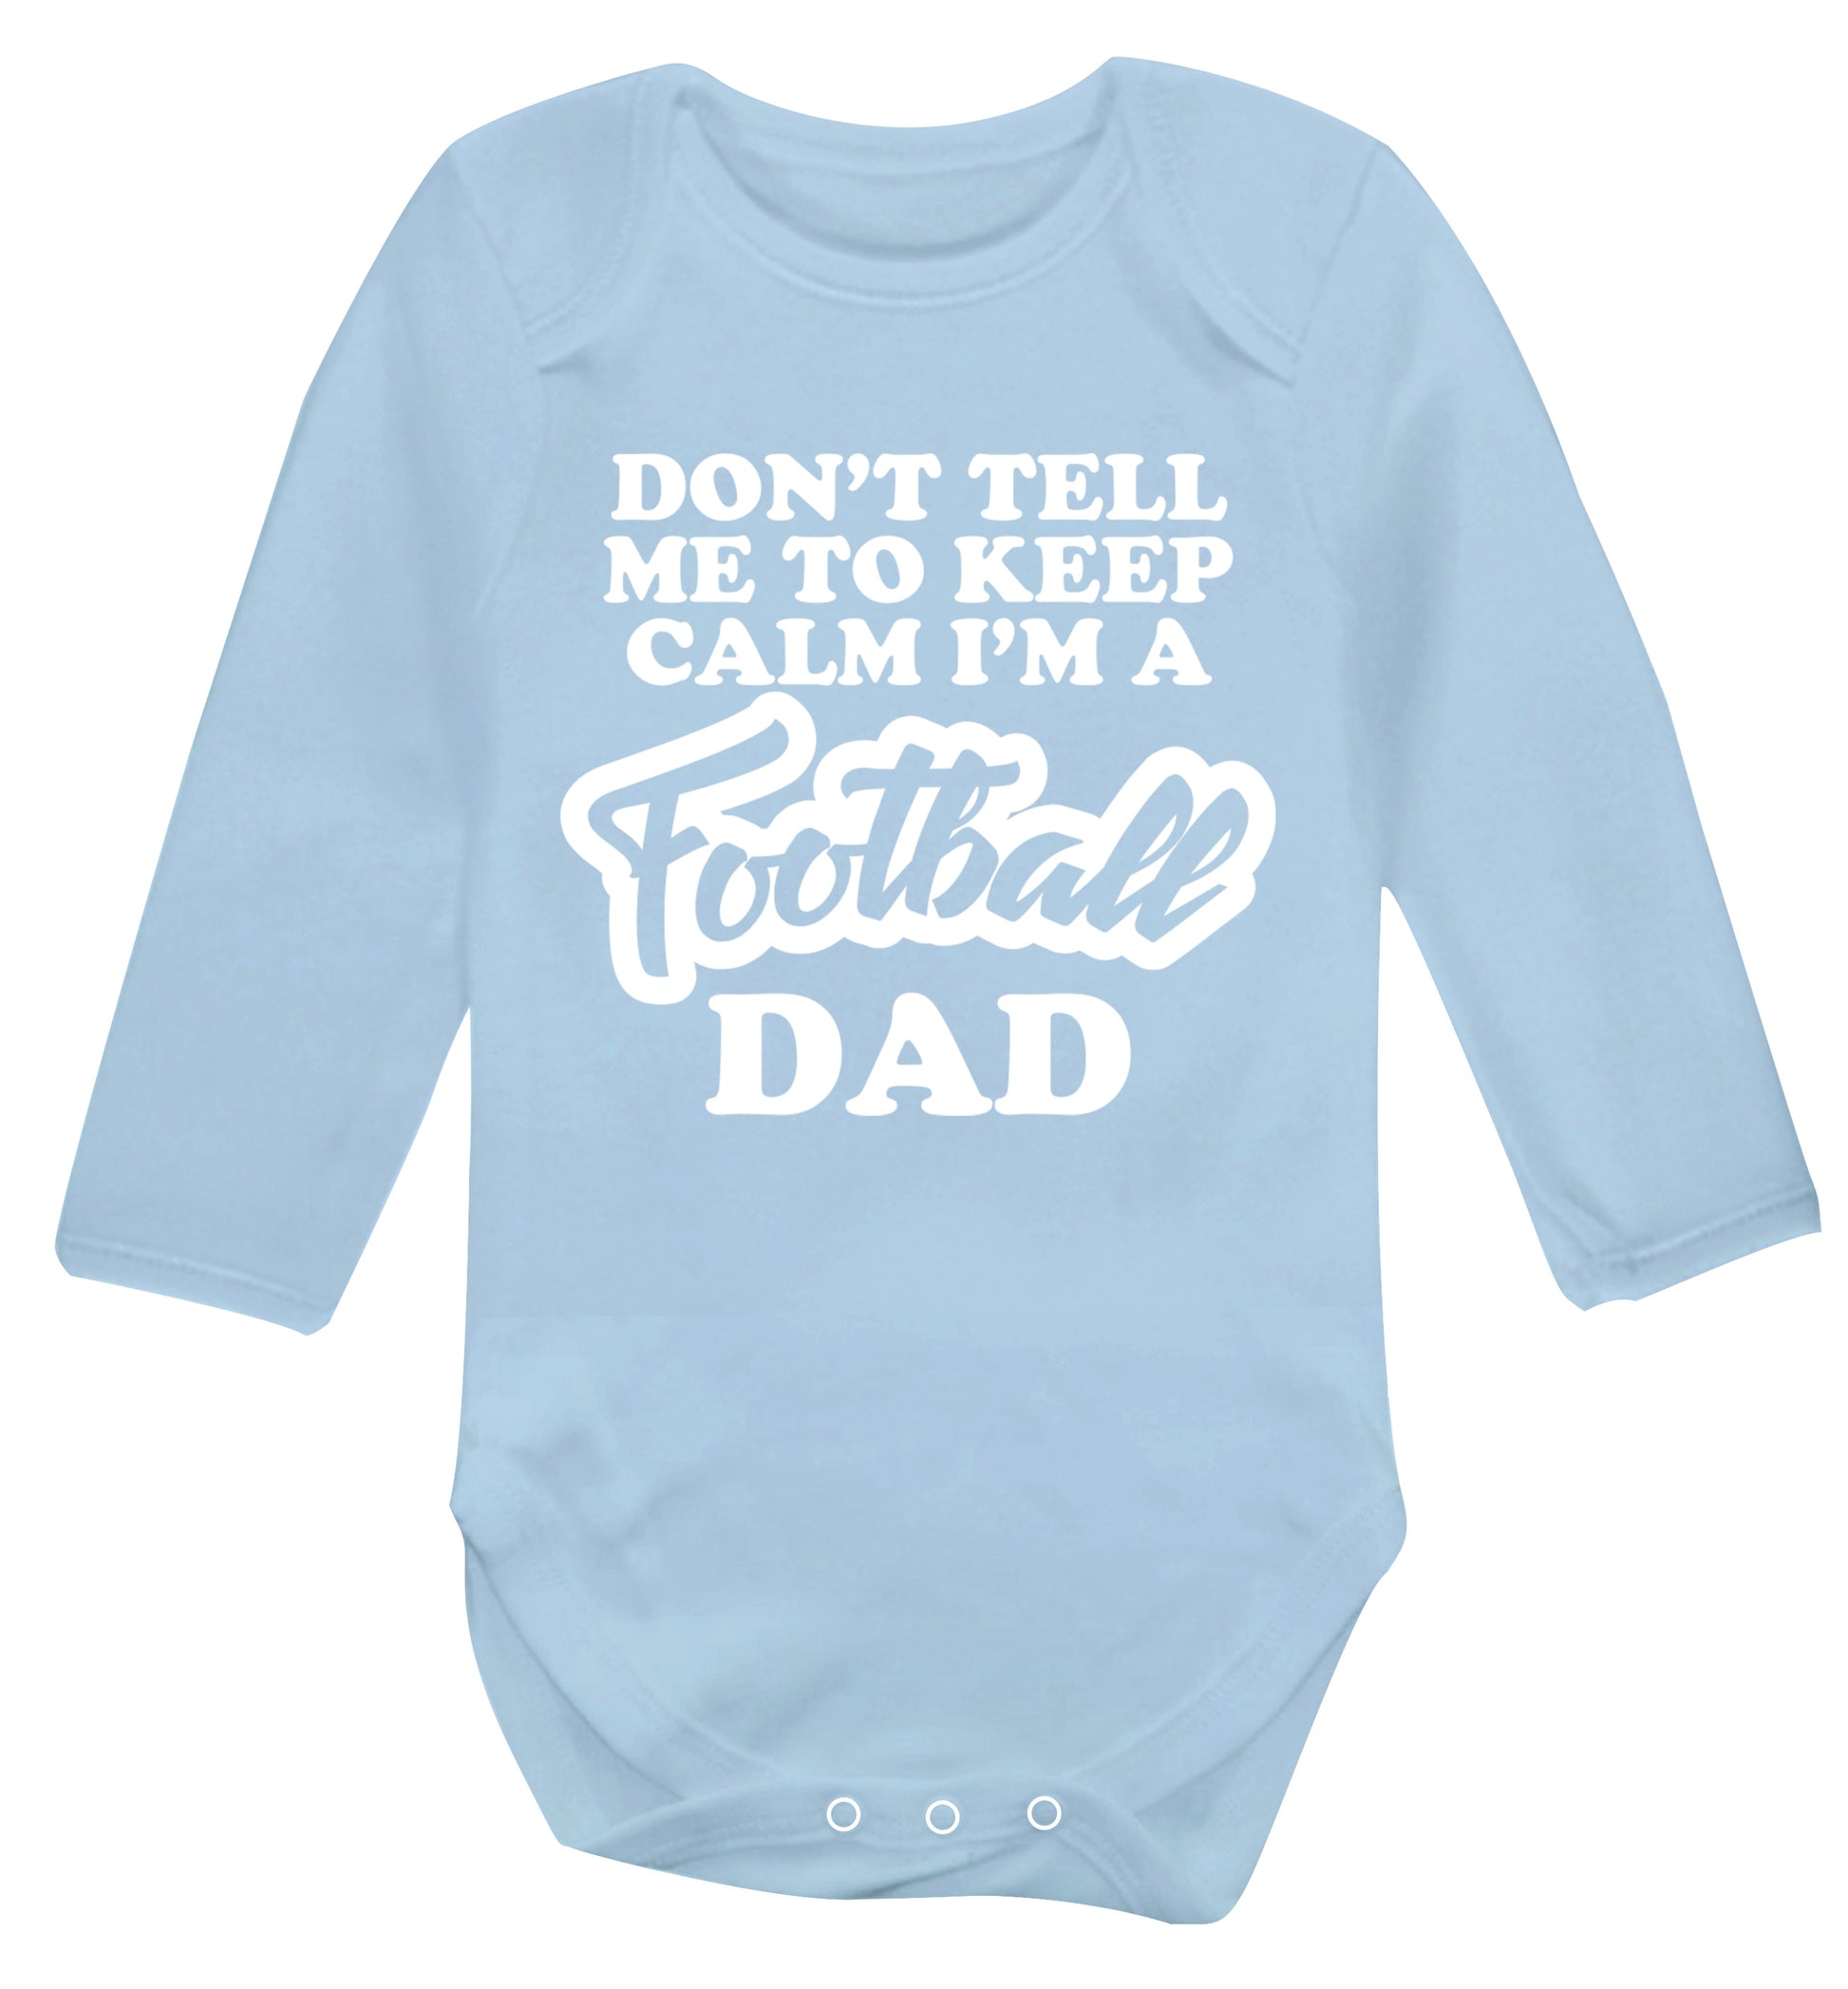 Don't tell me to keep calm I'm a football dad Baby Vest long sleeved pale blue 6-12 months